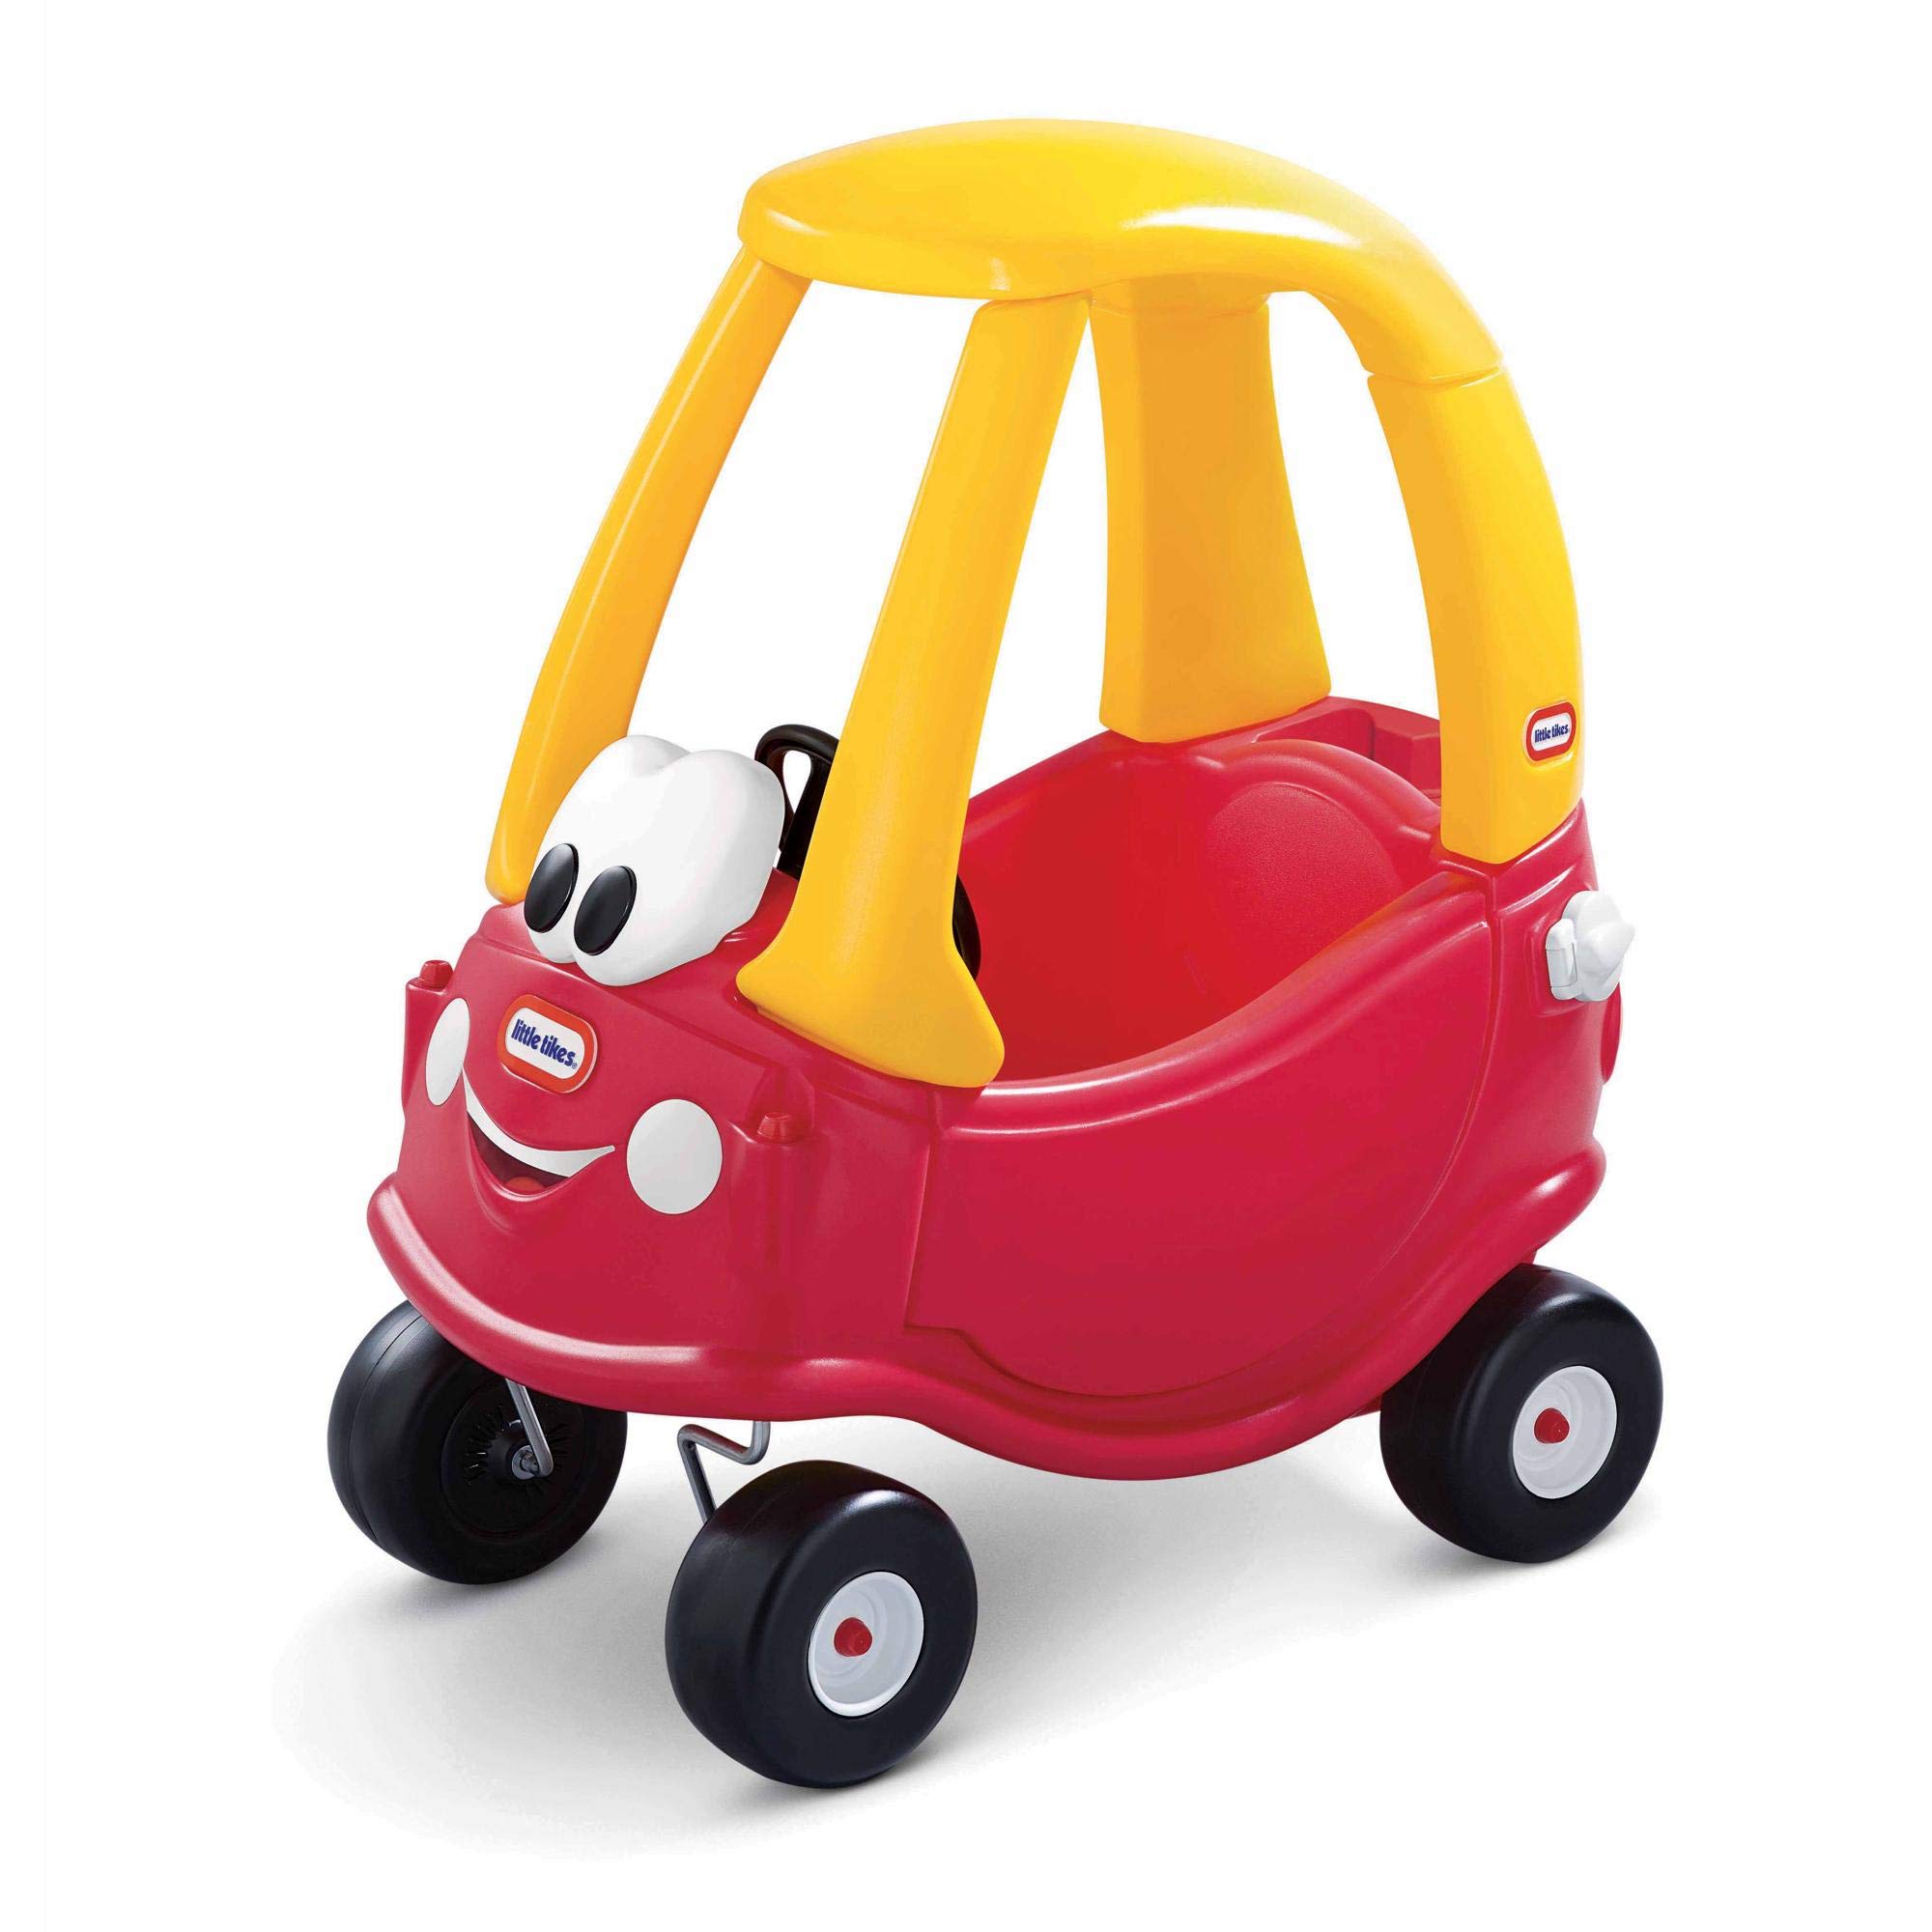 From Miniature Racers to Luxury Cars: Exploring the Variety of Children's Cars